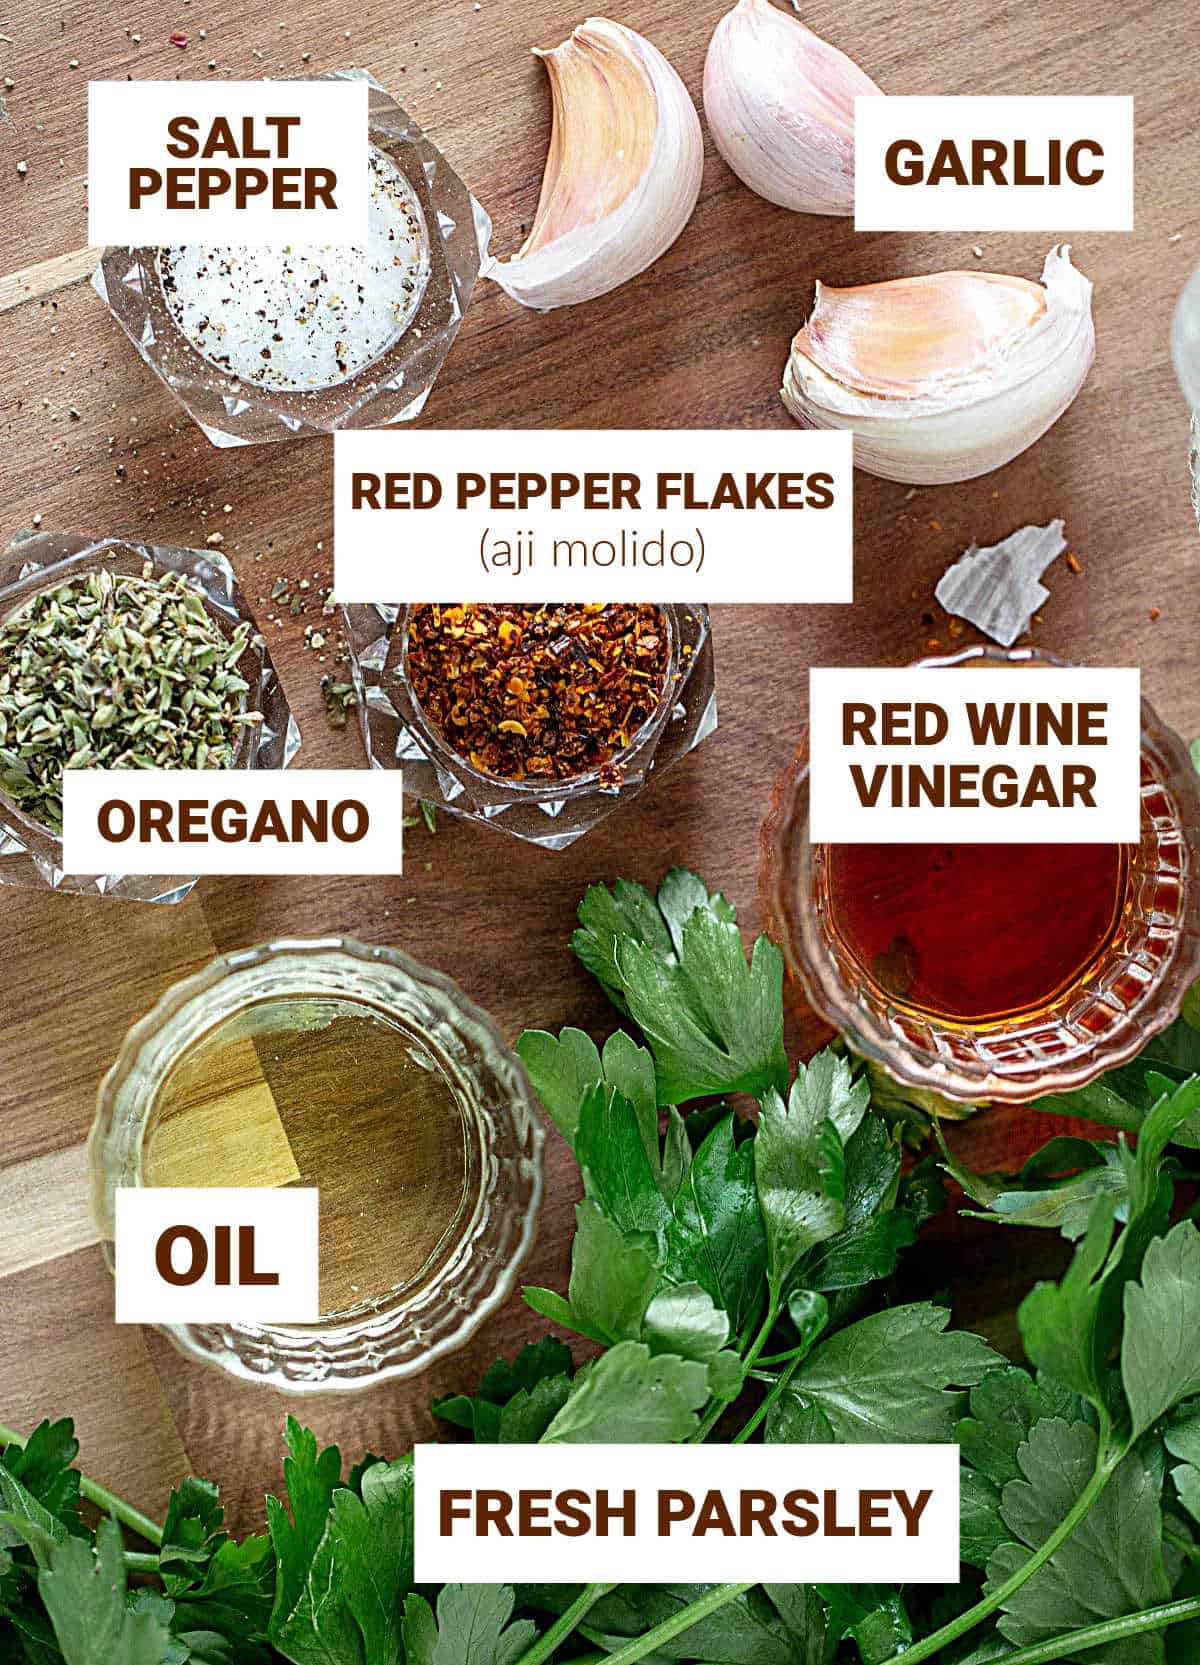 Garlic cloves, fresh parsley and rest of chimichurri ingredients in small bowls on wooden board, text overlay